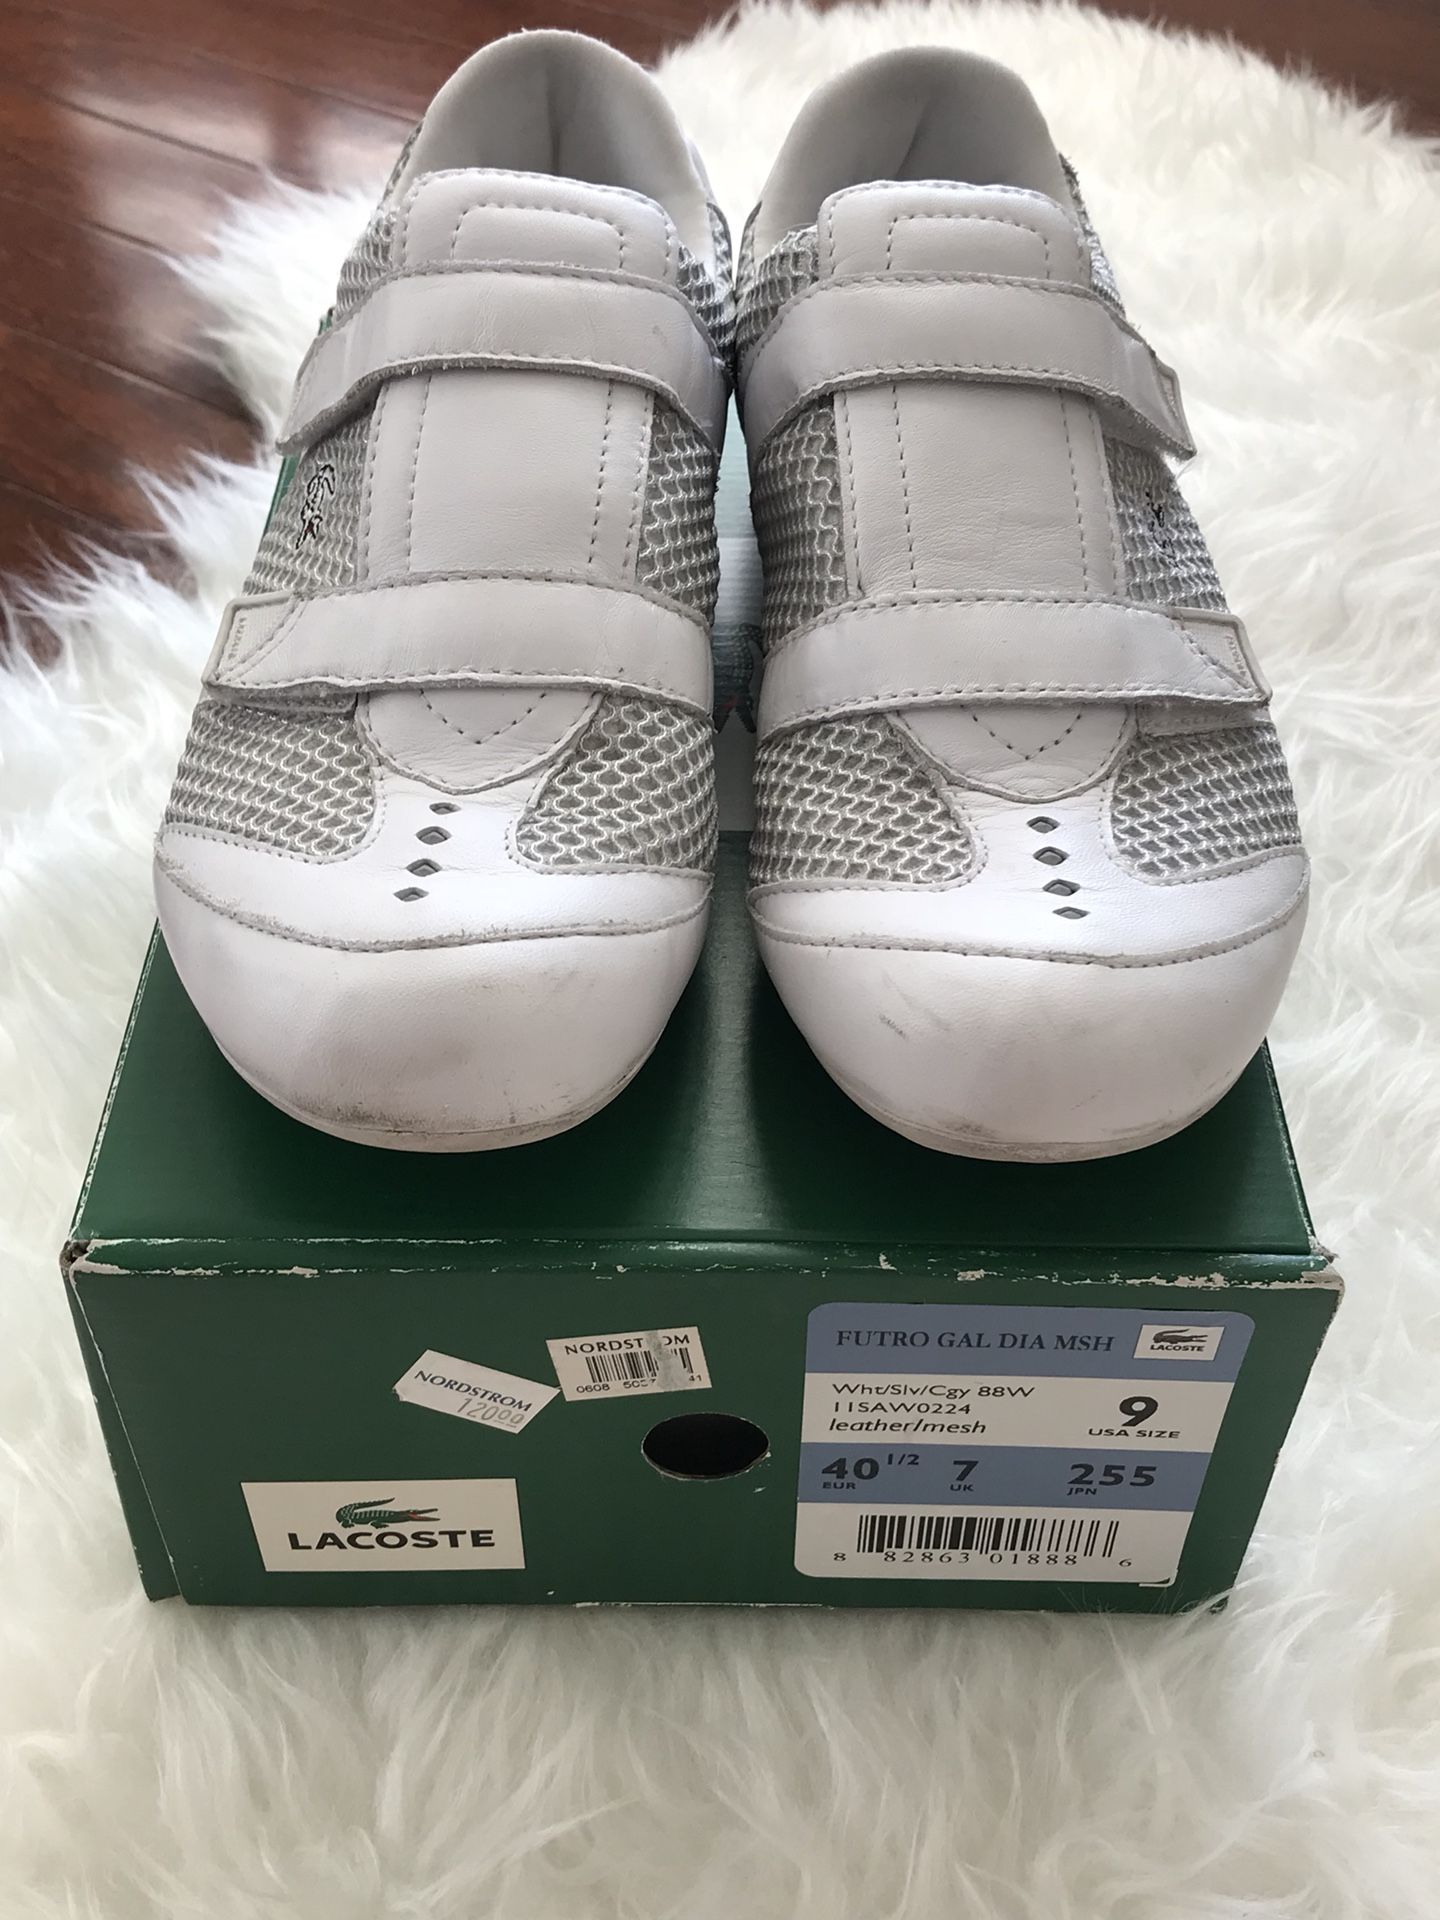 Womens Shoes, LACOSTE Size 9